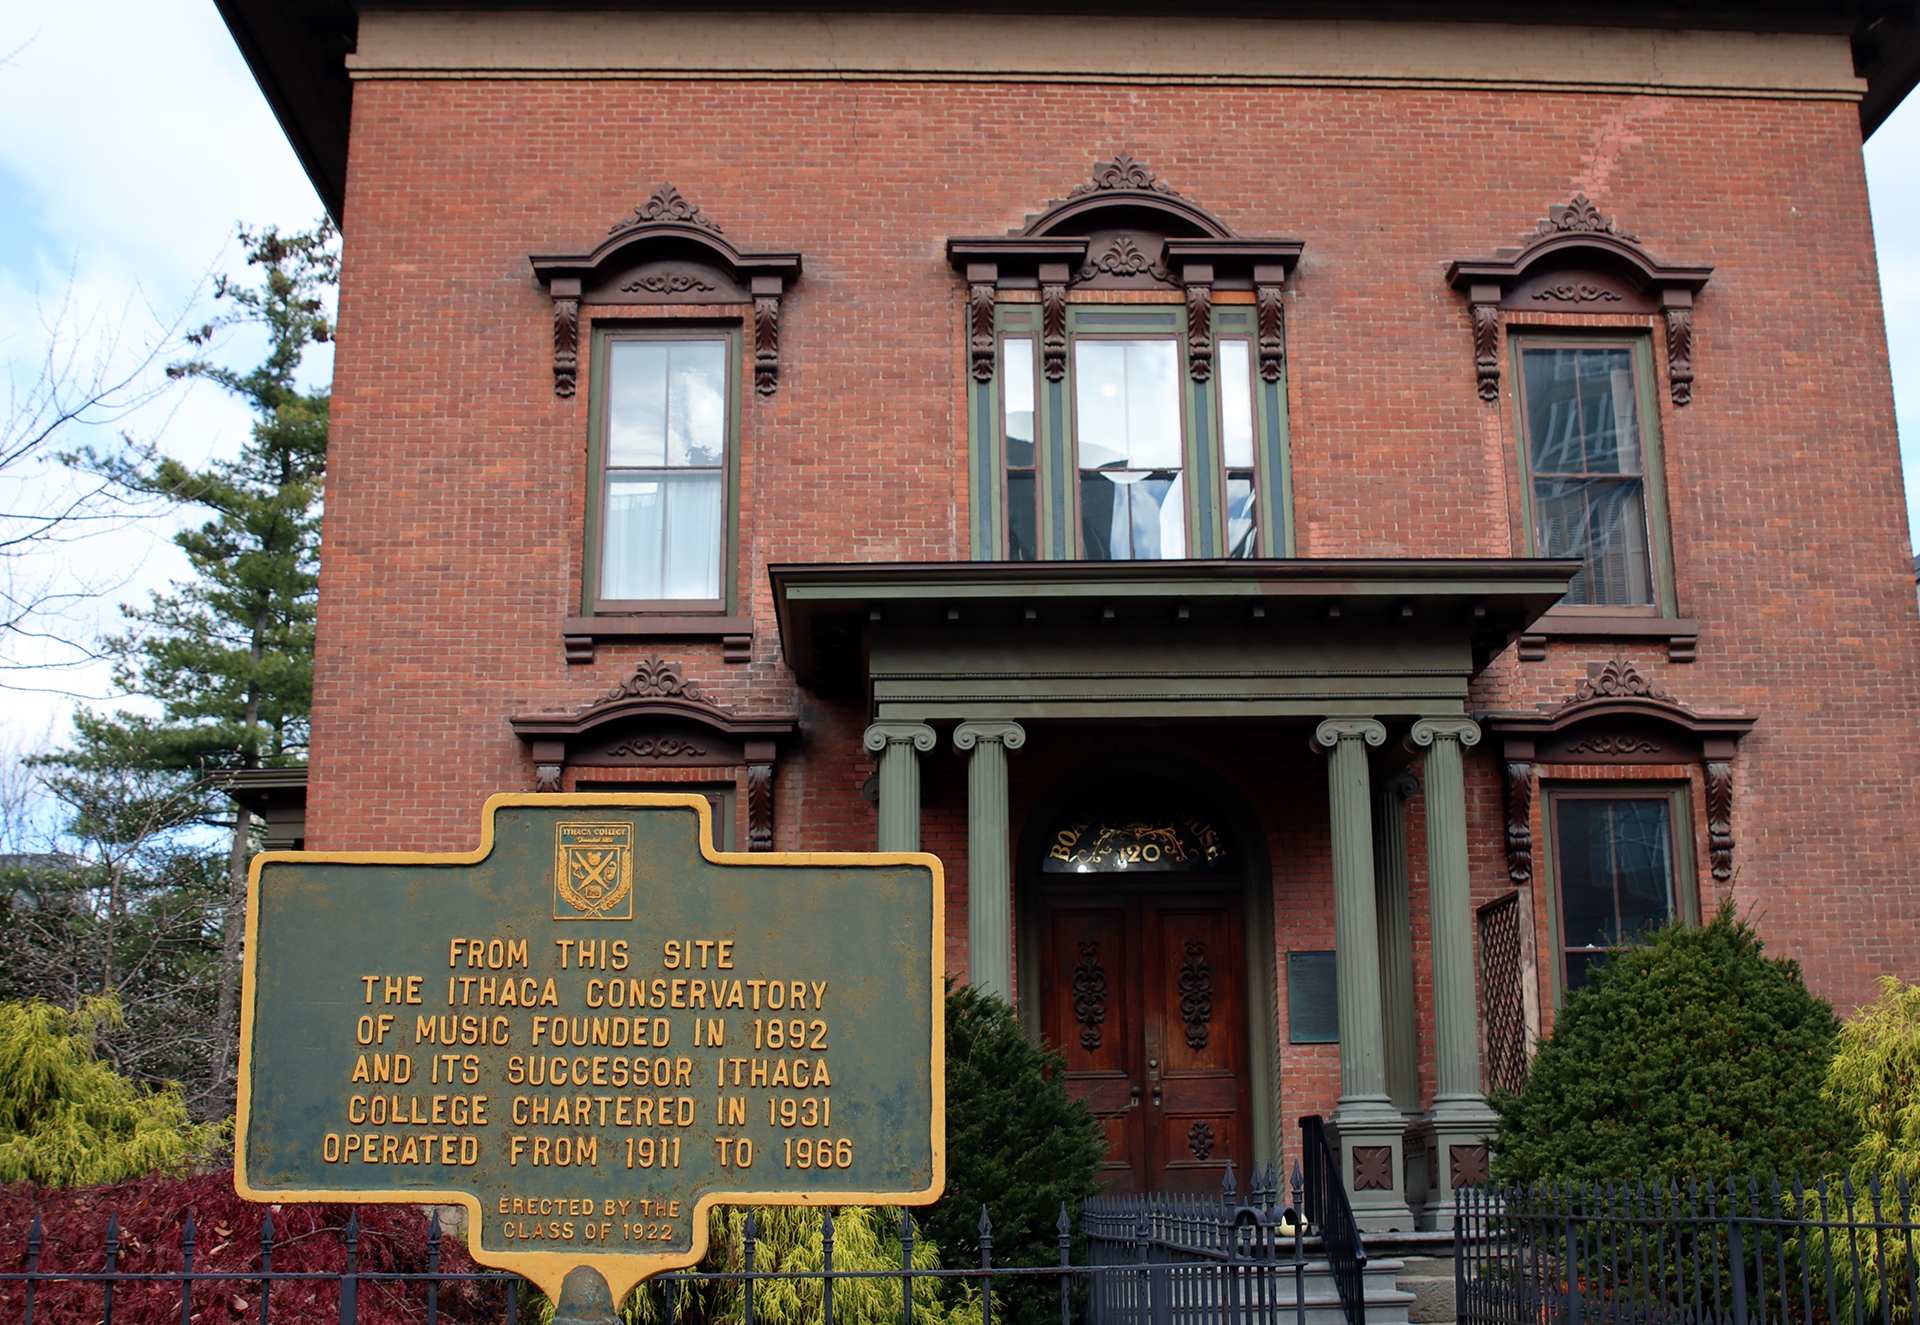 https://aap.cornell.edu/Well%20preserved%20brick%20building%20with%20historical%20marker%20in%20front